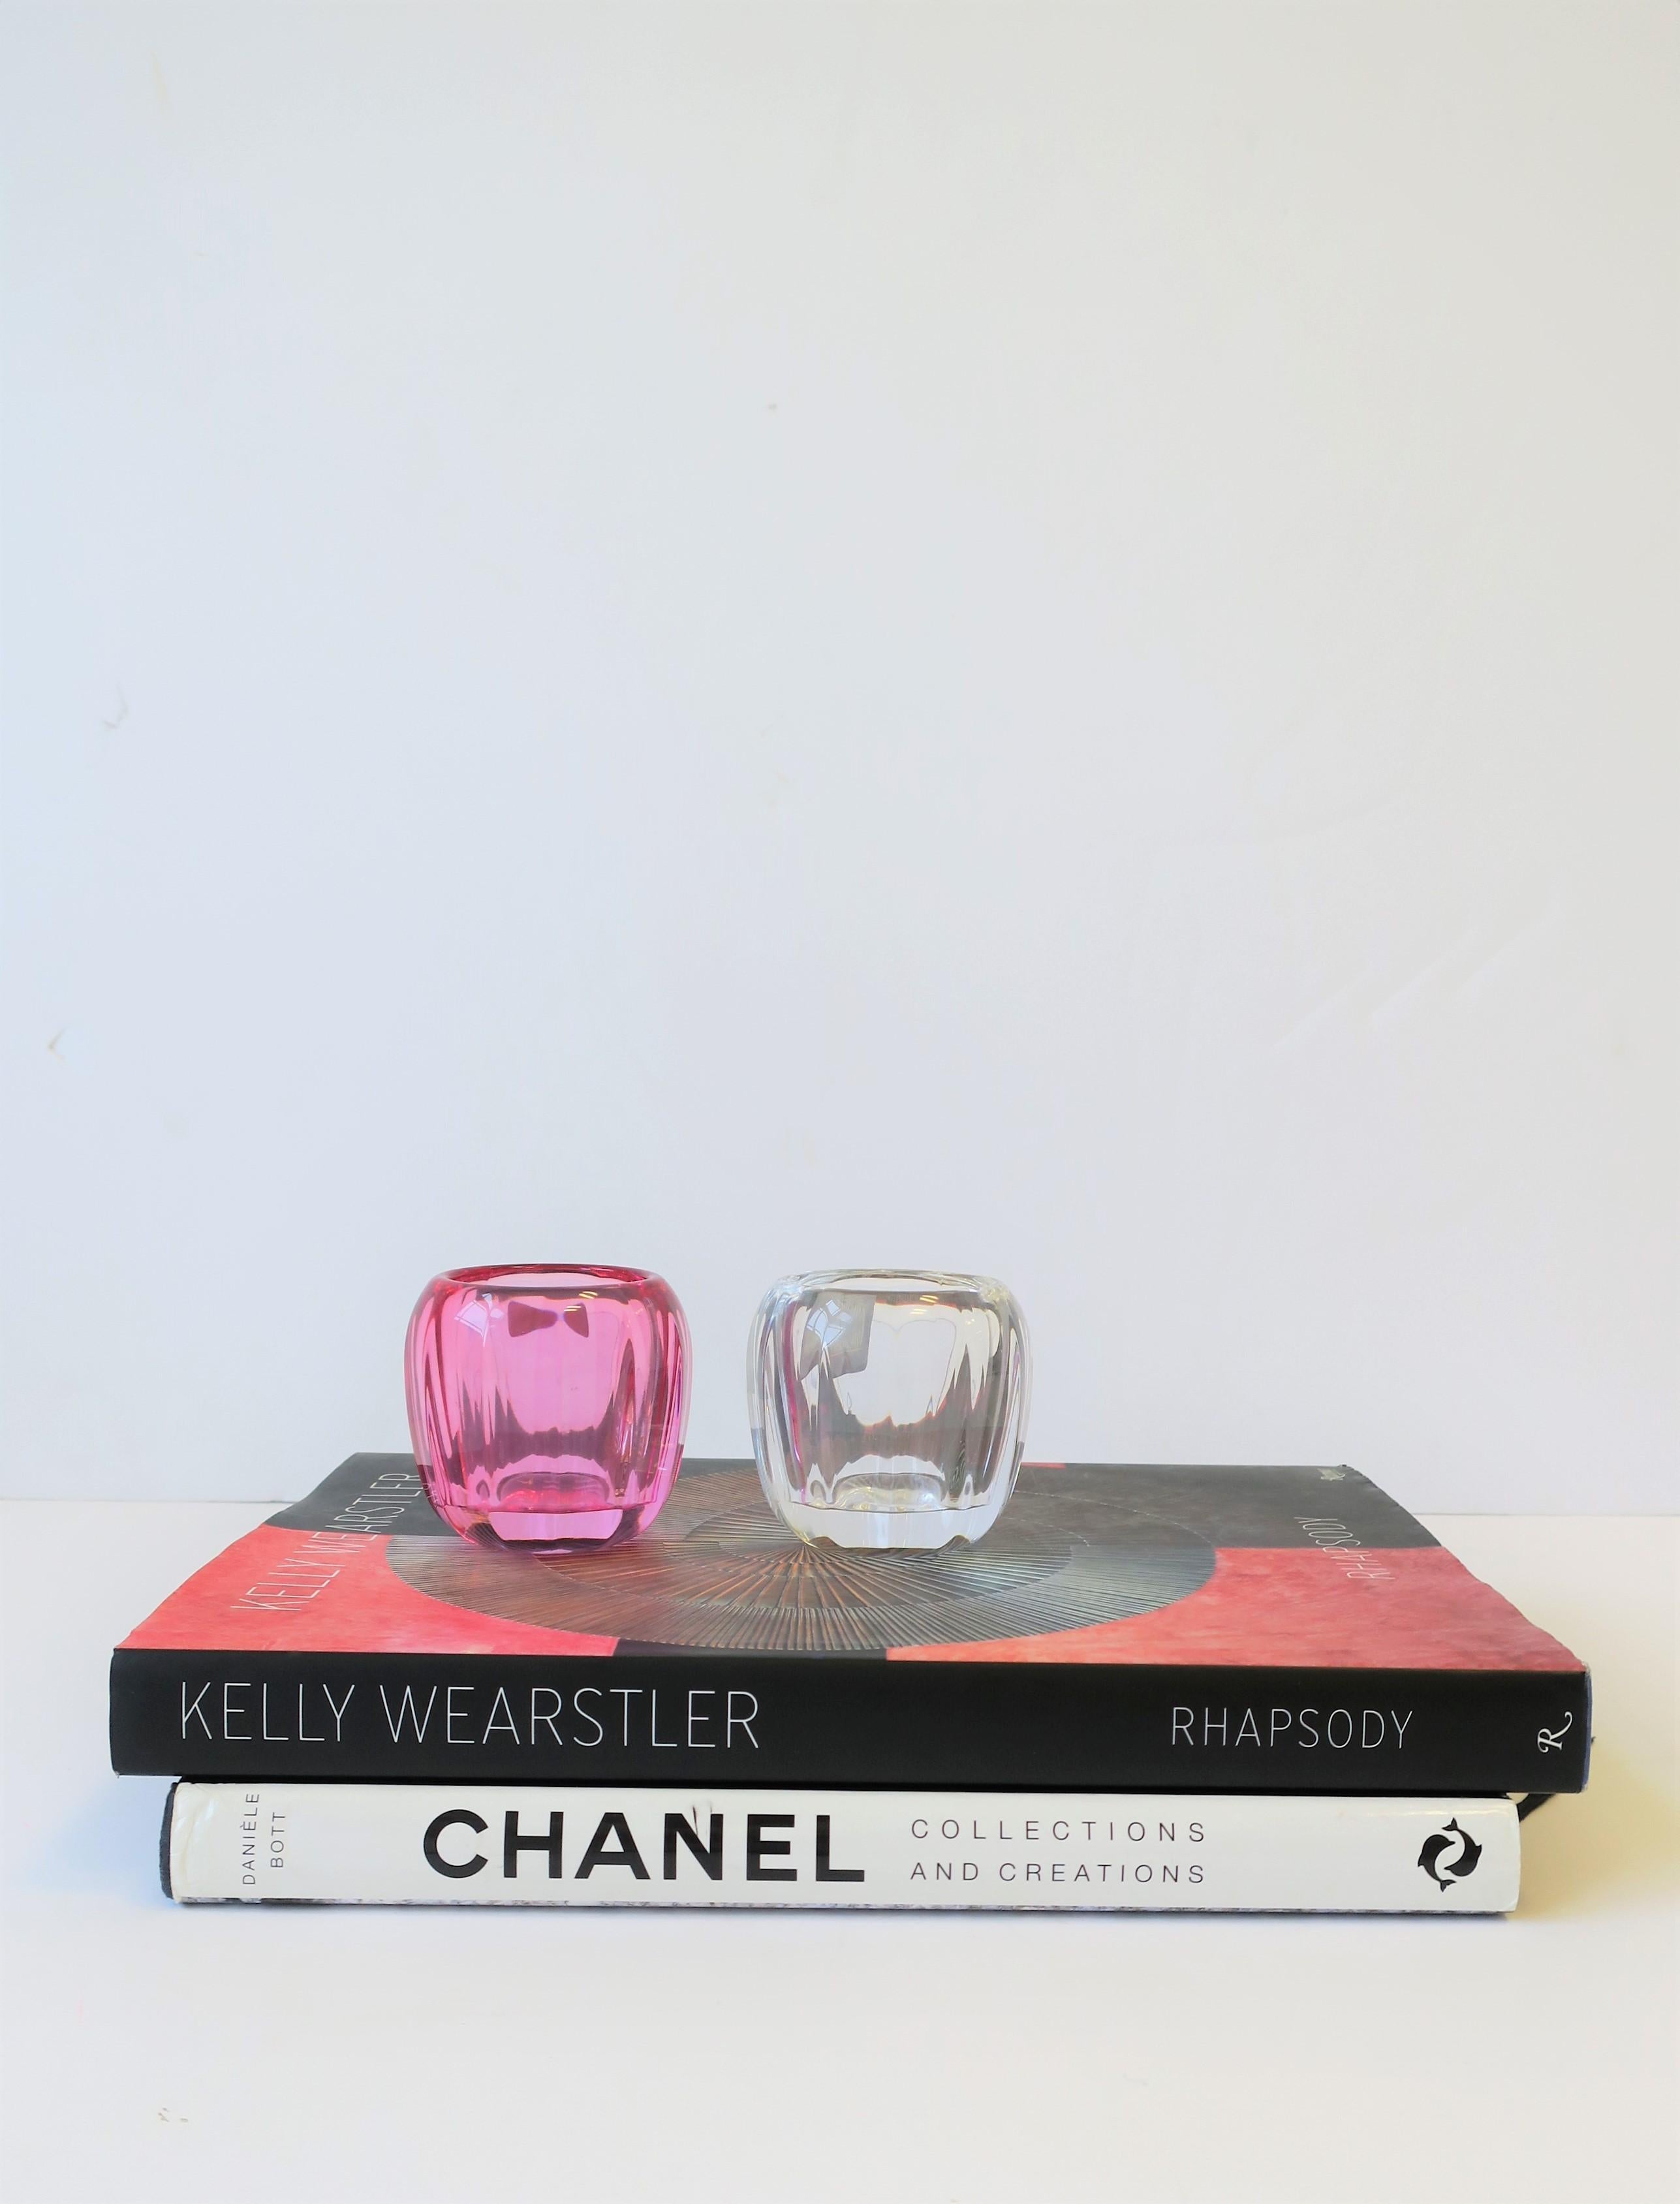 A very beautiful set of pink and clear crystal votive candle holders by Villeroy & Boch, circa 21st century. Villeroy & Boch was founded in France in 1748.